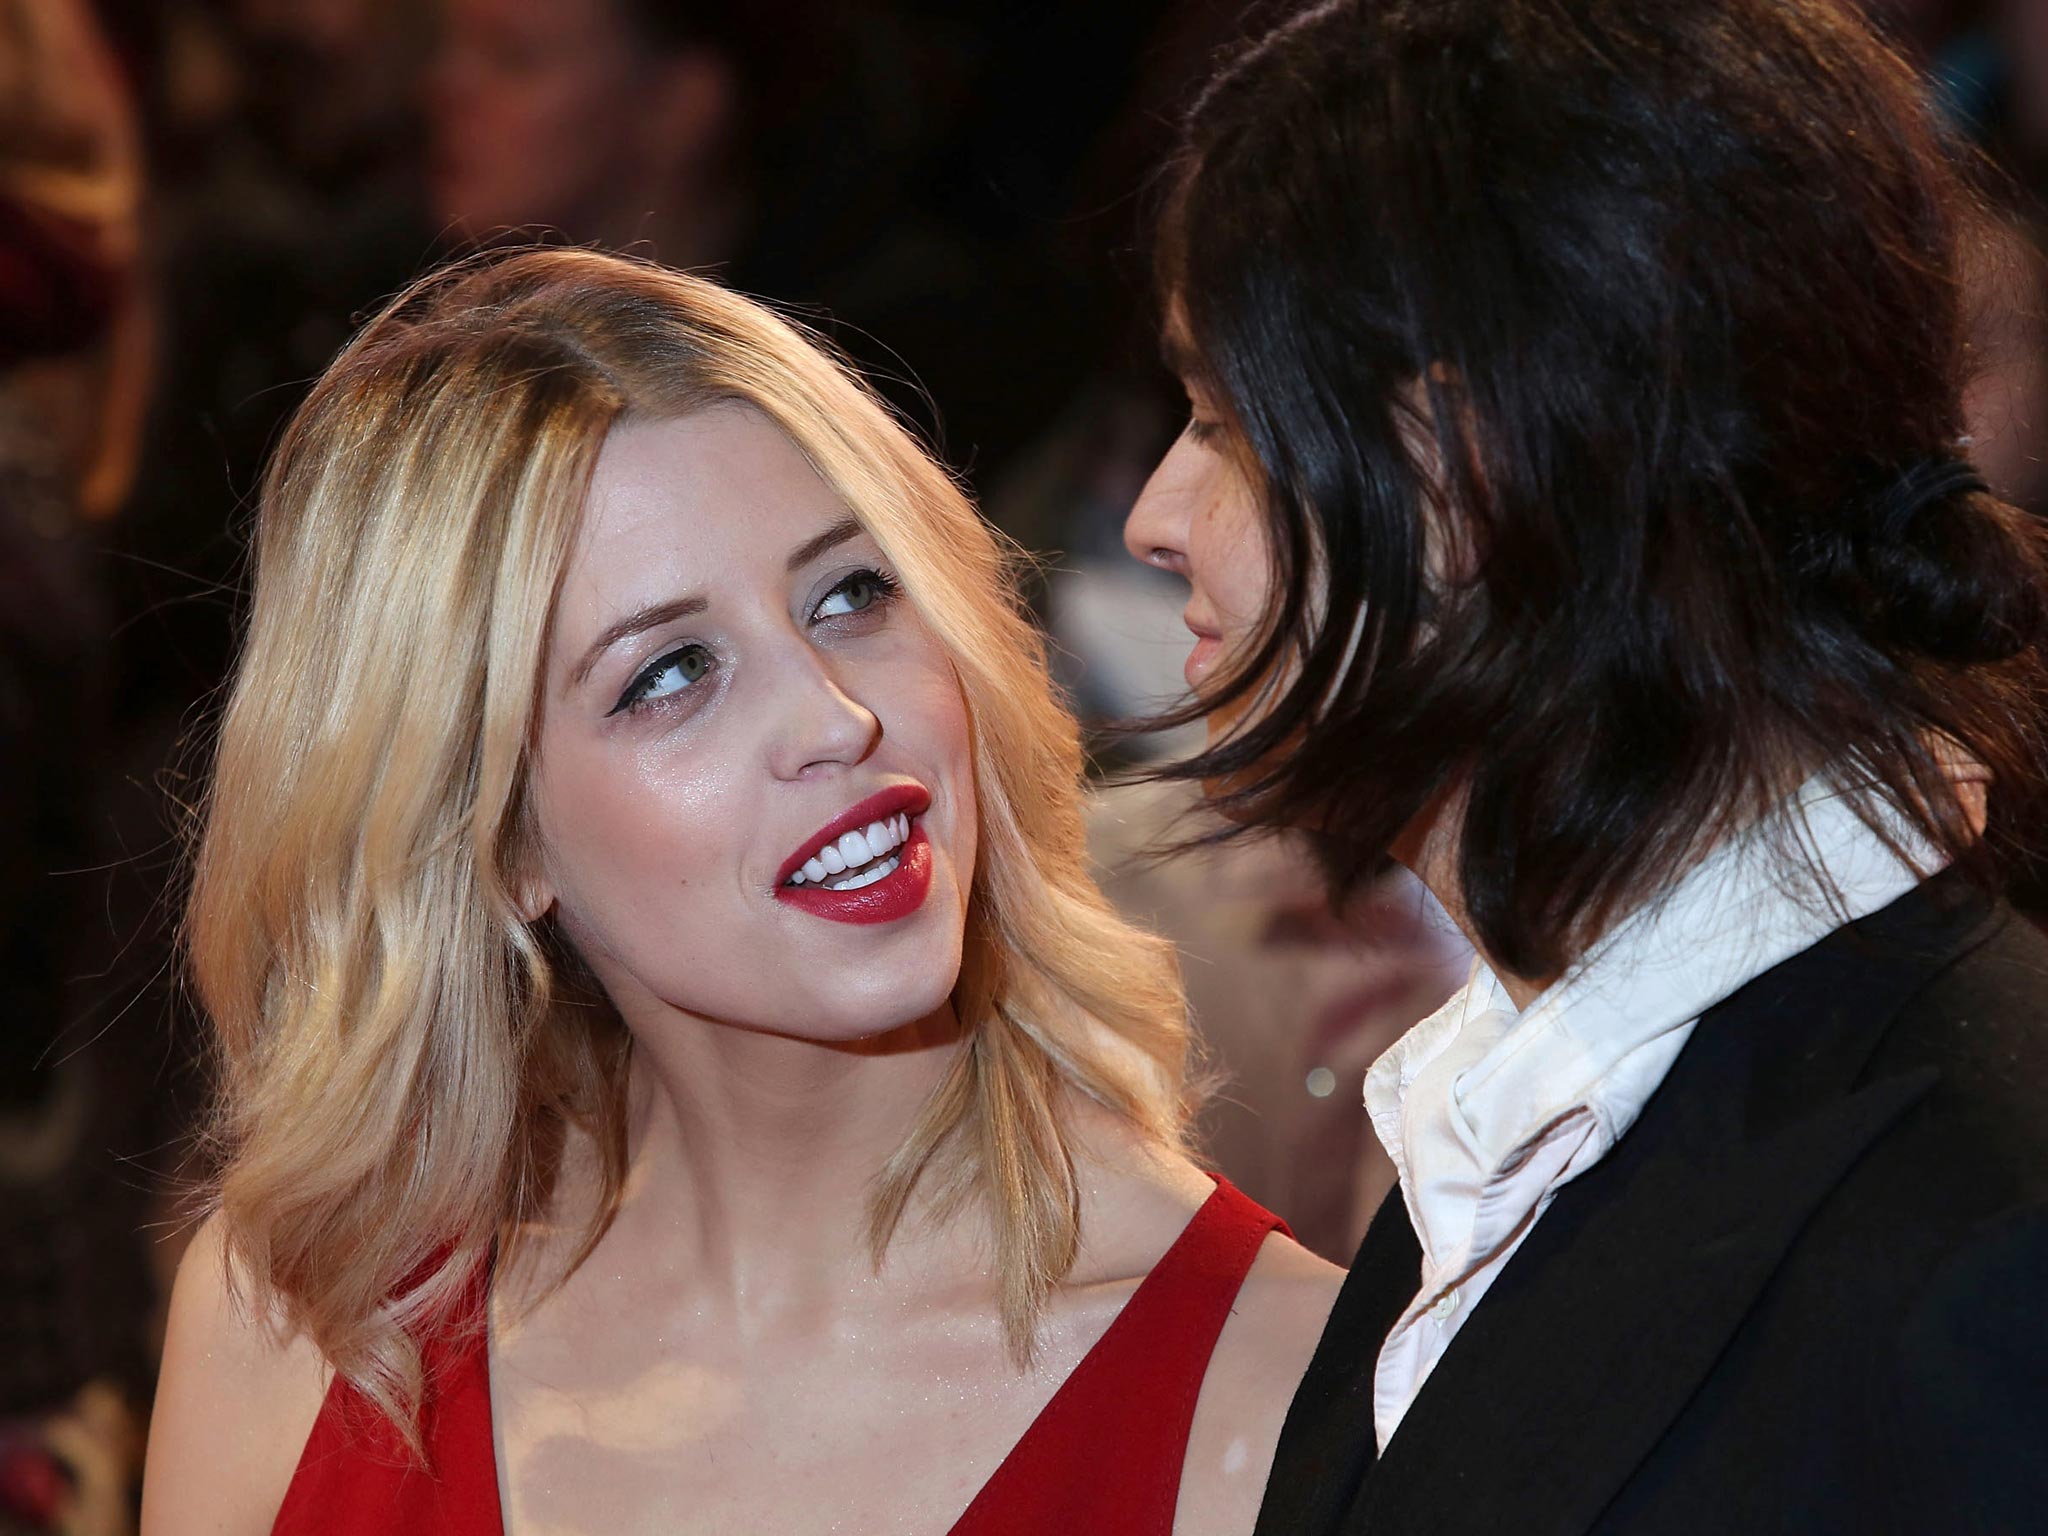 Peaches Geldof and Thomas Cohen back in 2012